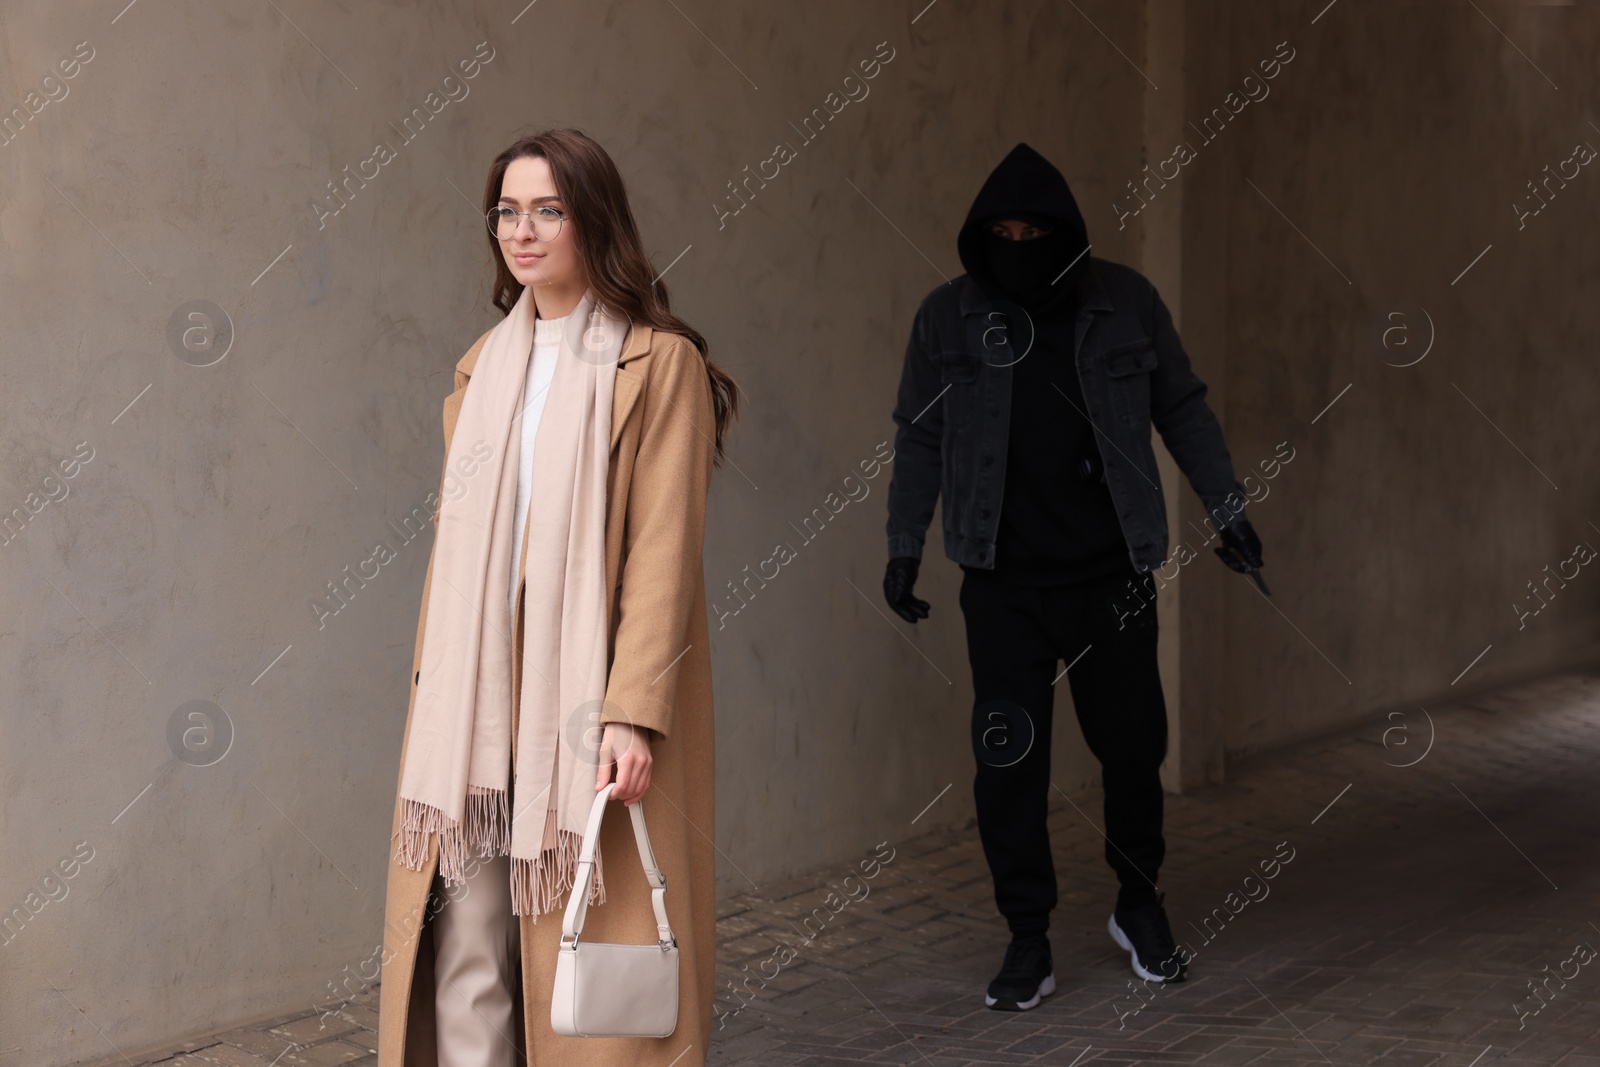 Photo of Man with knife stalking young woman in alley